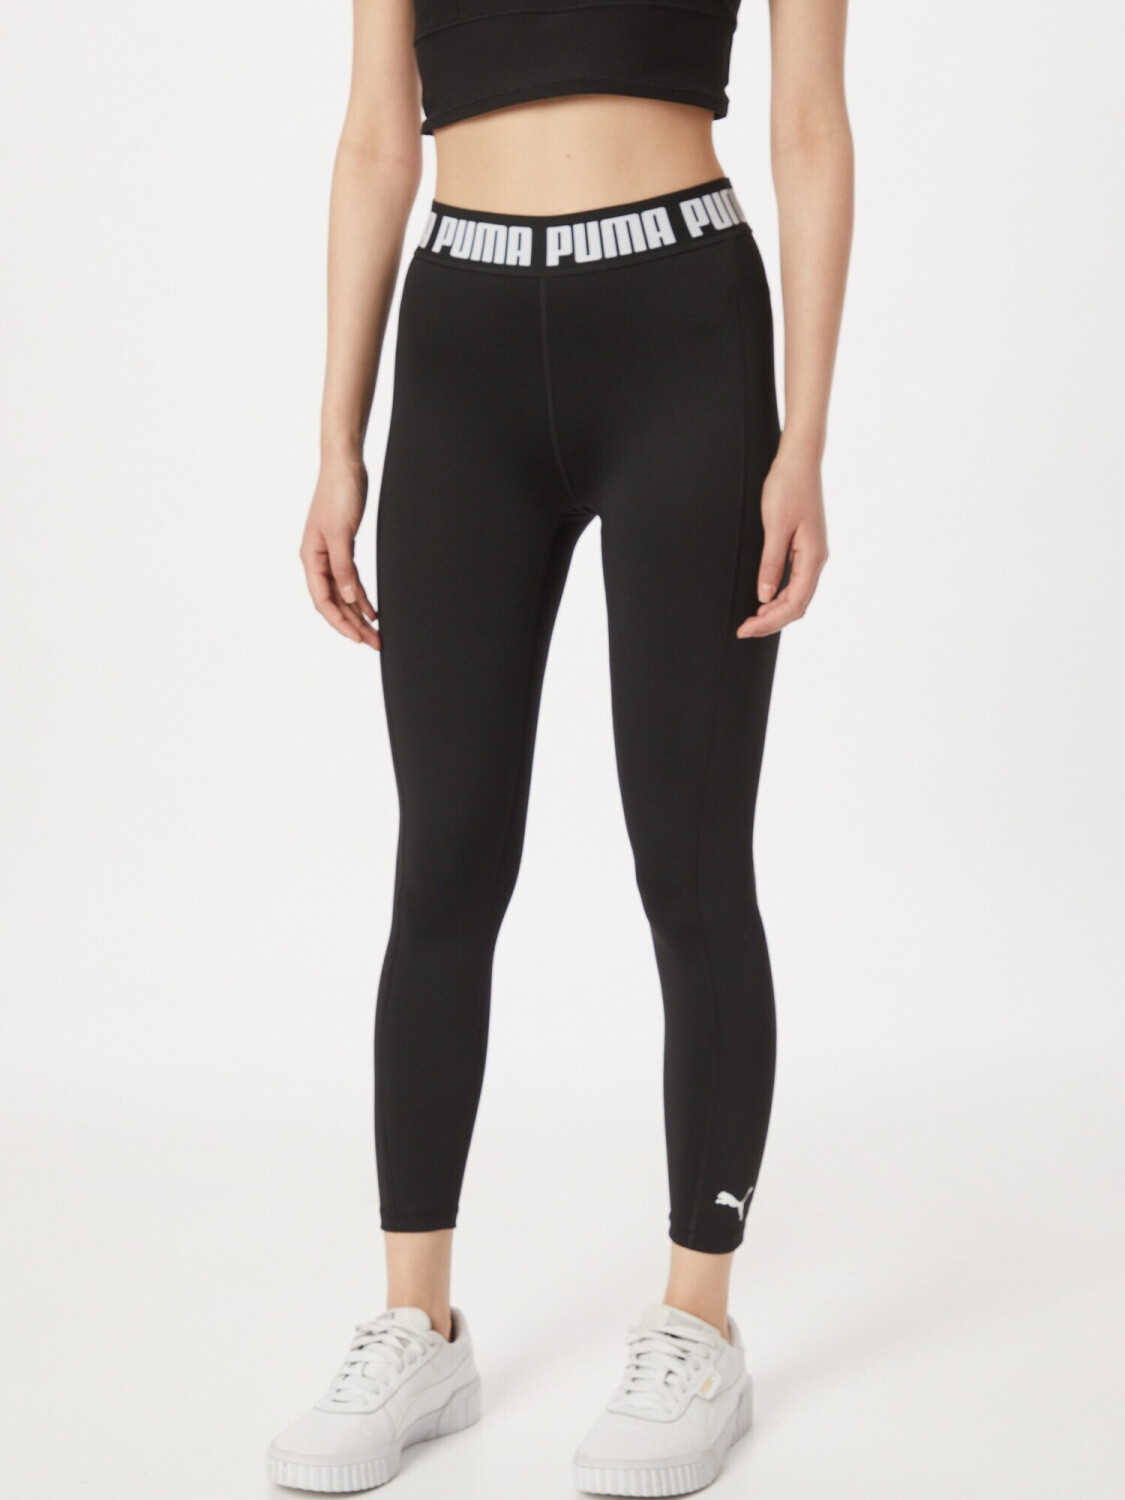 Buy Puma Leggings Strong Best black – £12.00 Deals on High Full (Today) (521601) from puma Waist